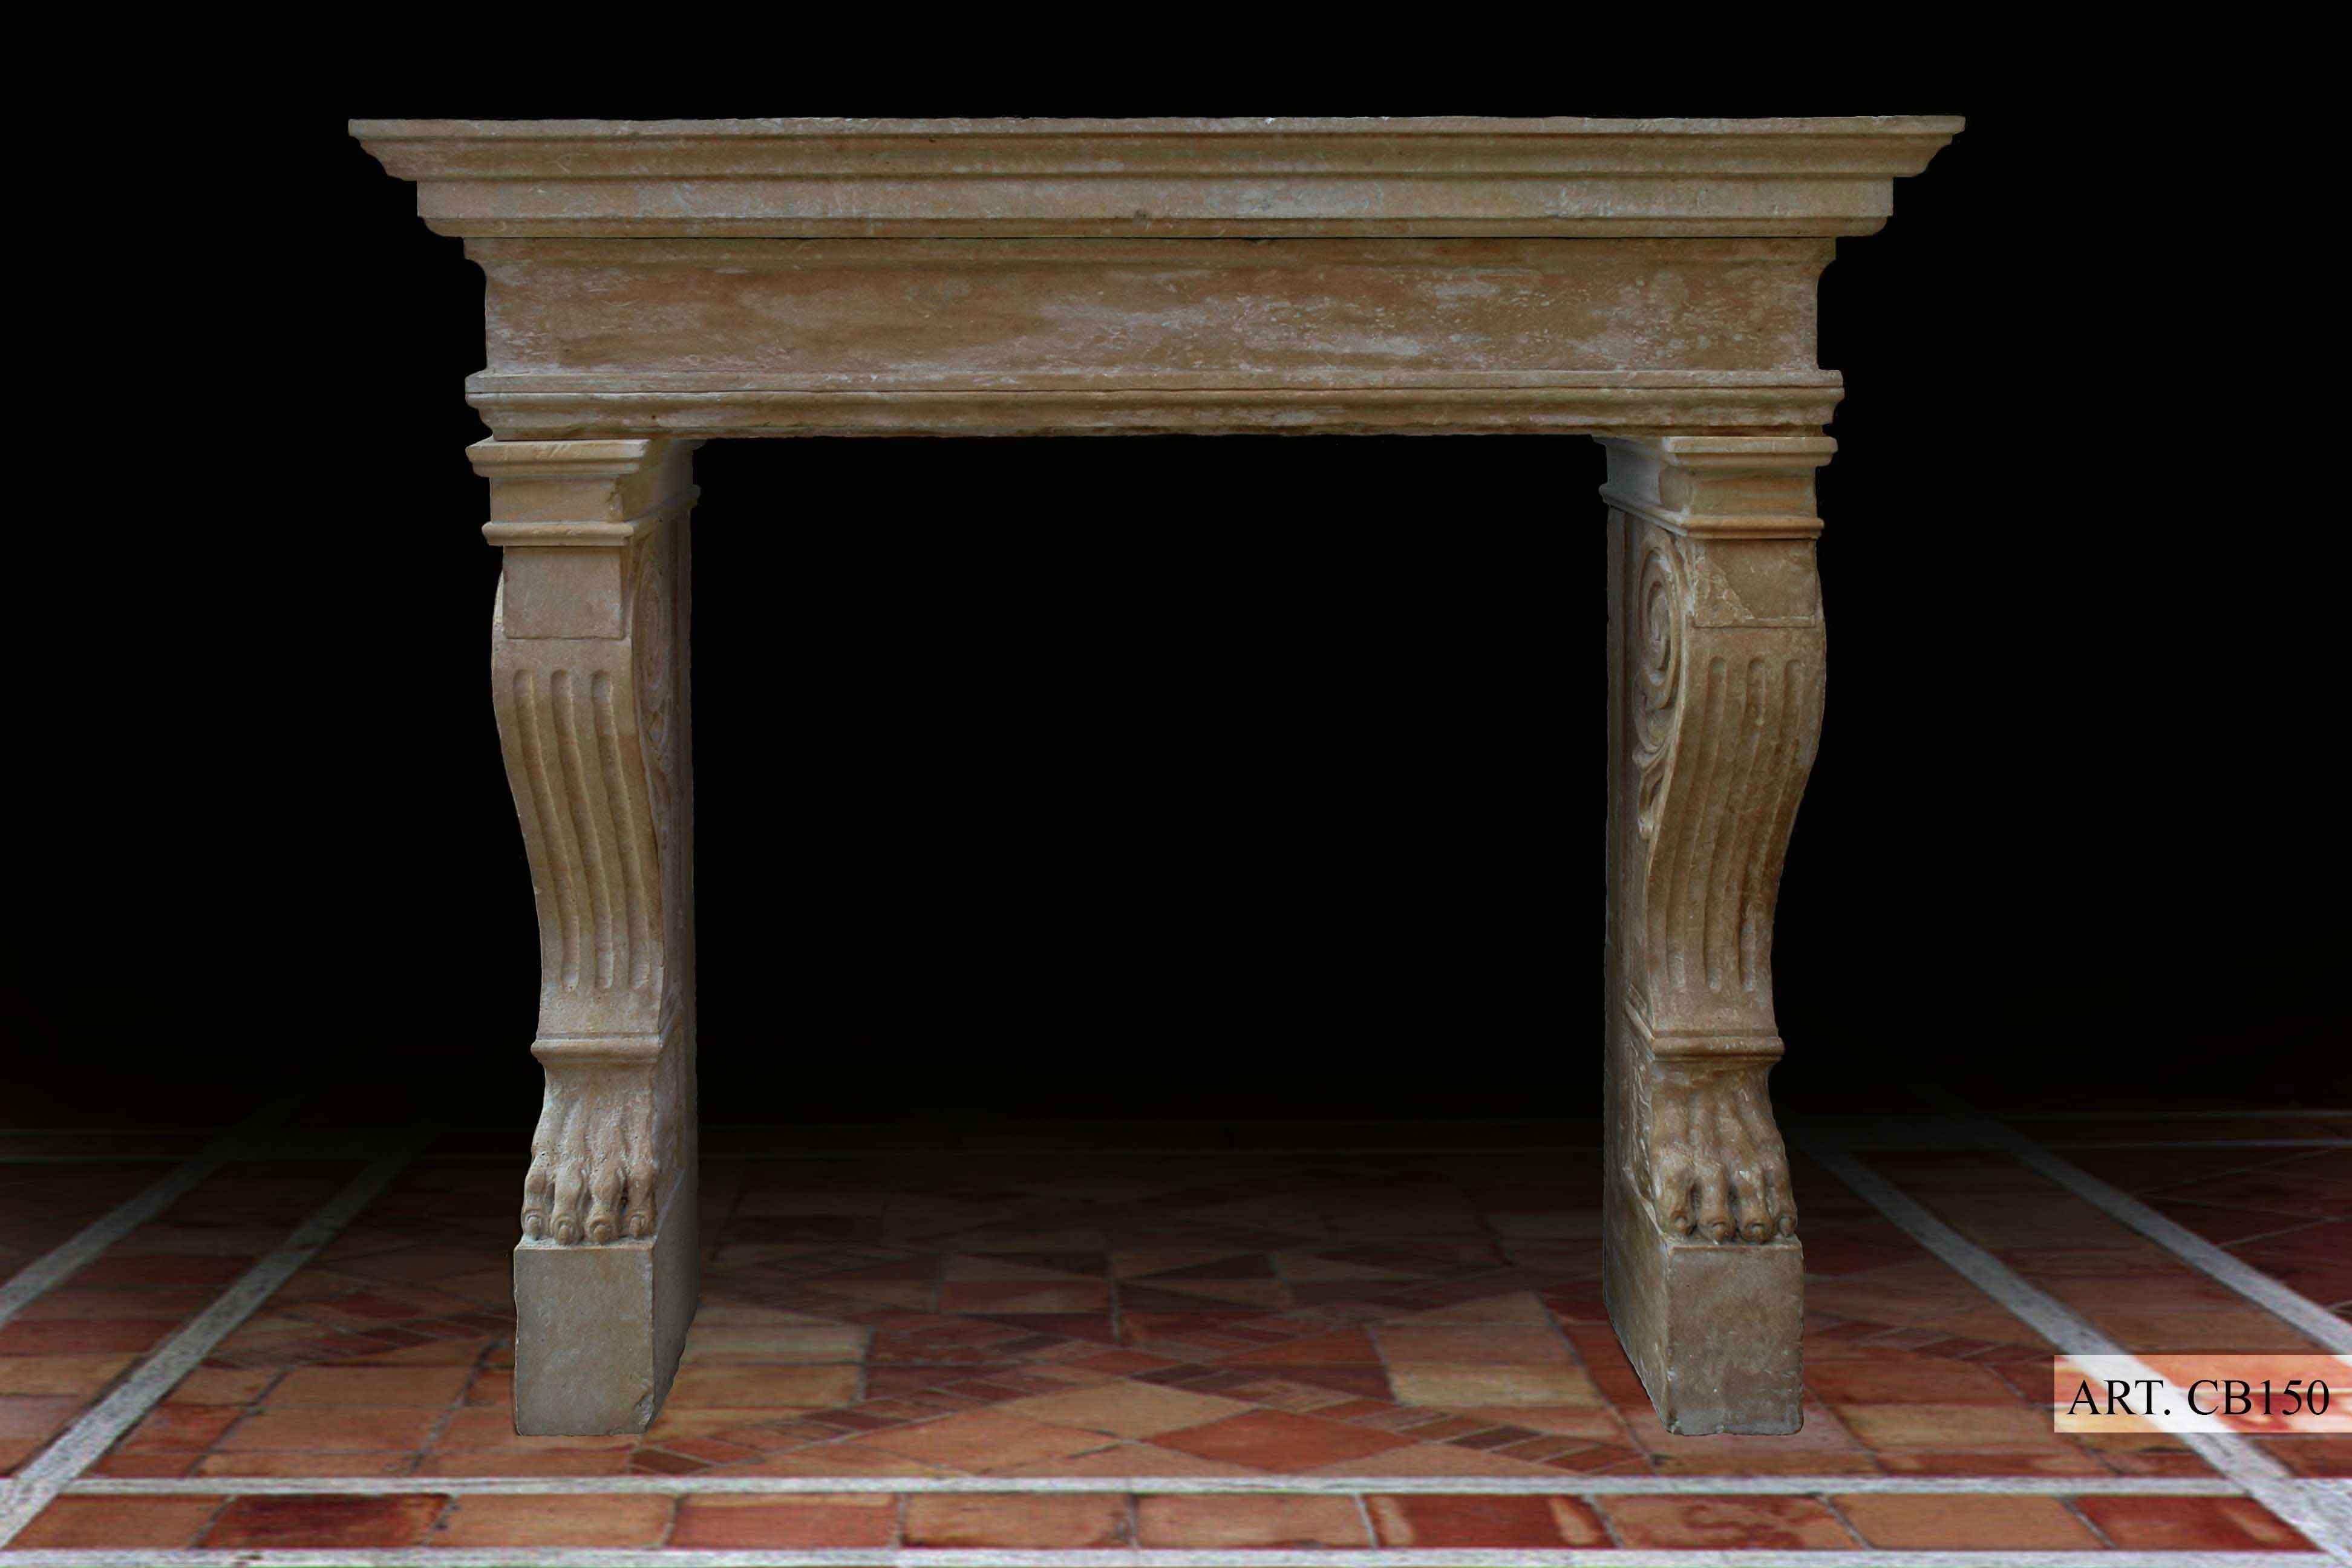 An Italian Renaissance (late) style fireplace, hand-carved in pure limestone from Italy.
Excellent quality of sculptures and art work, volutes inside and outside legs, deep fluting on front legs hand-carved as well, with lions feet on bottom